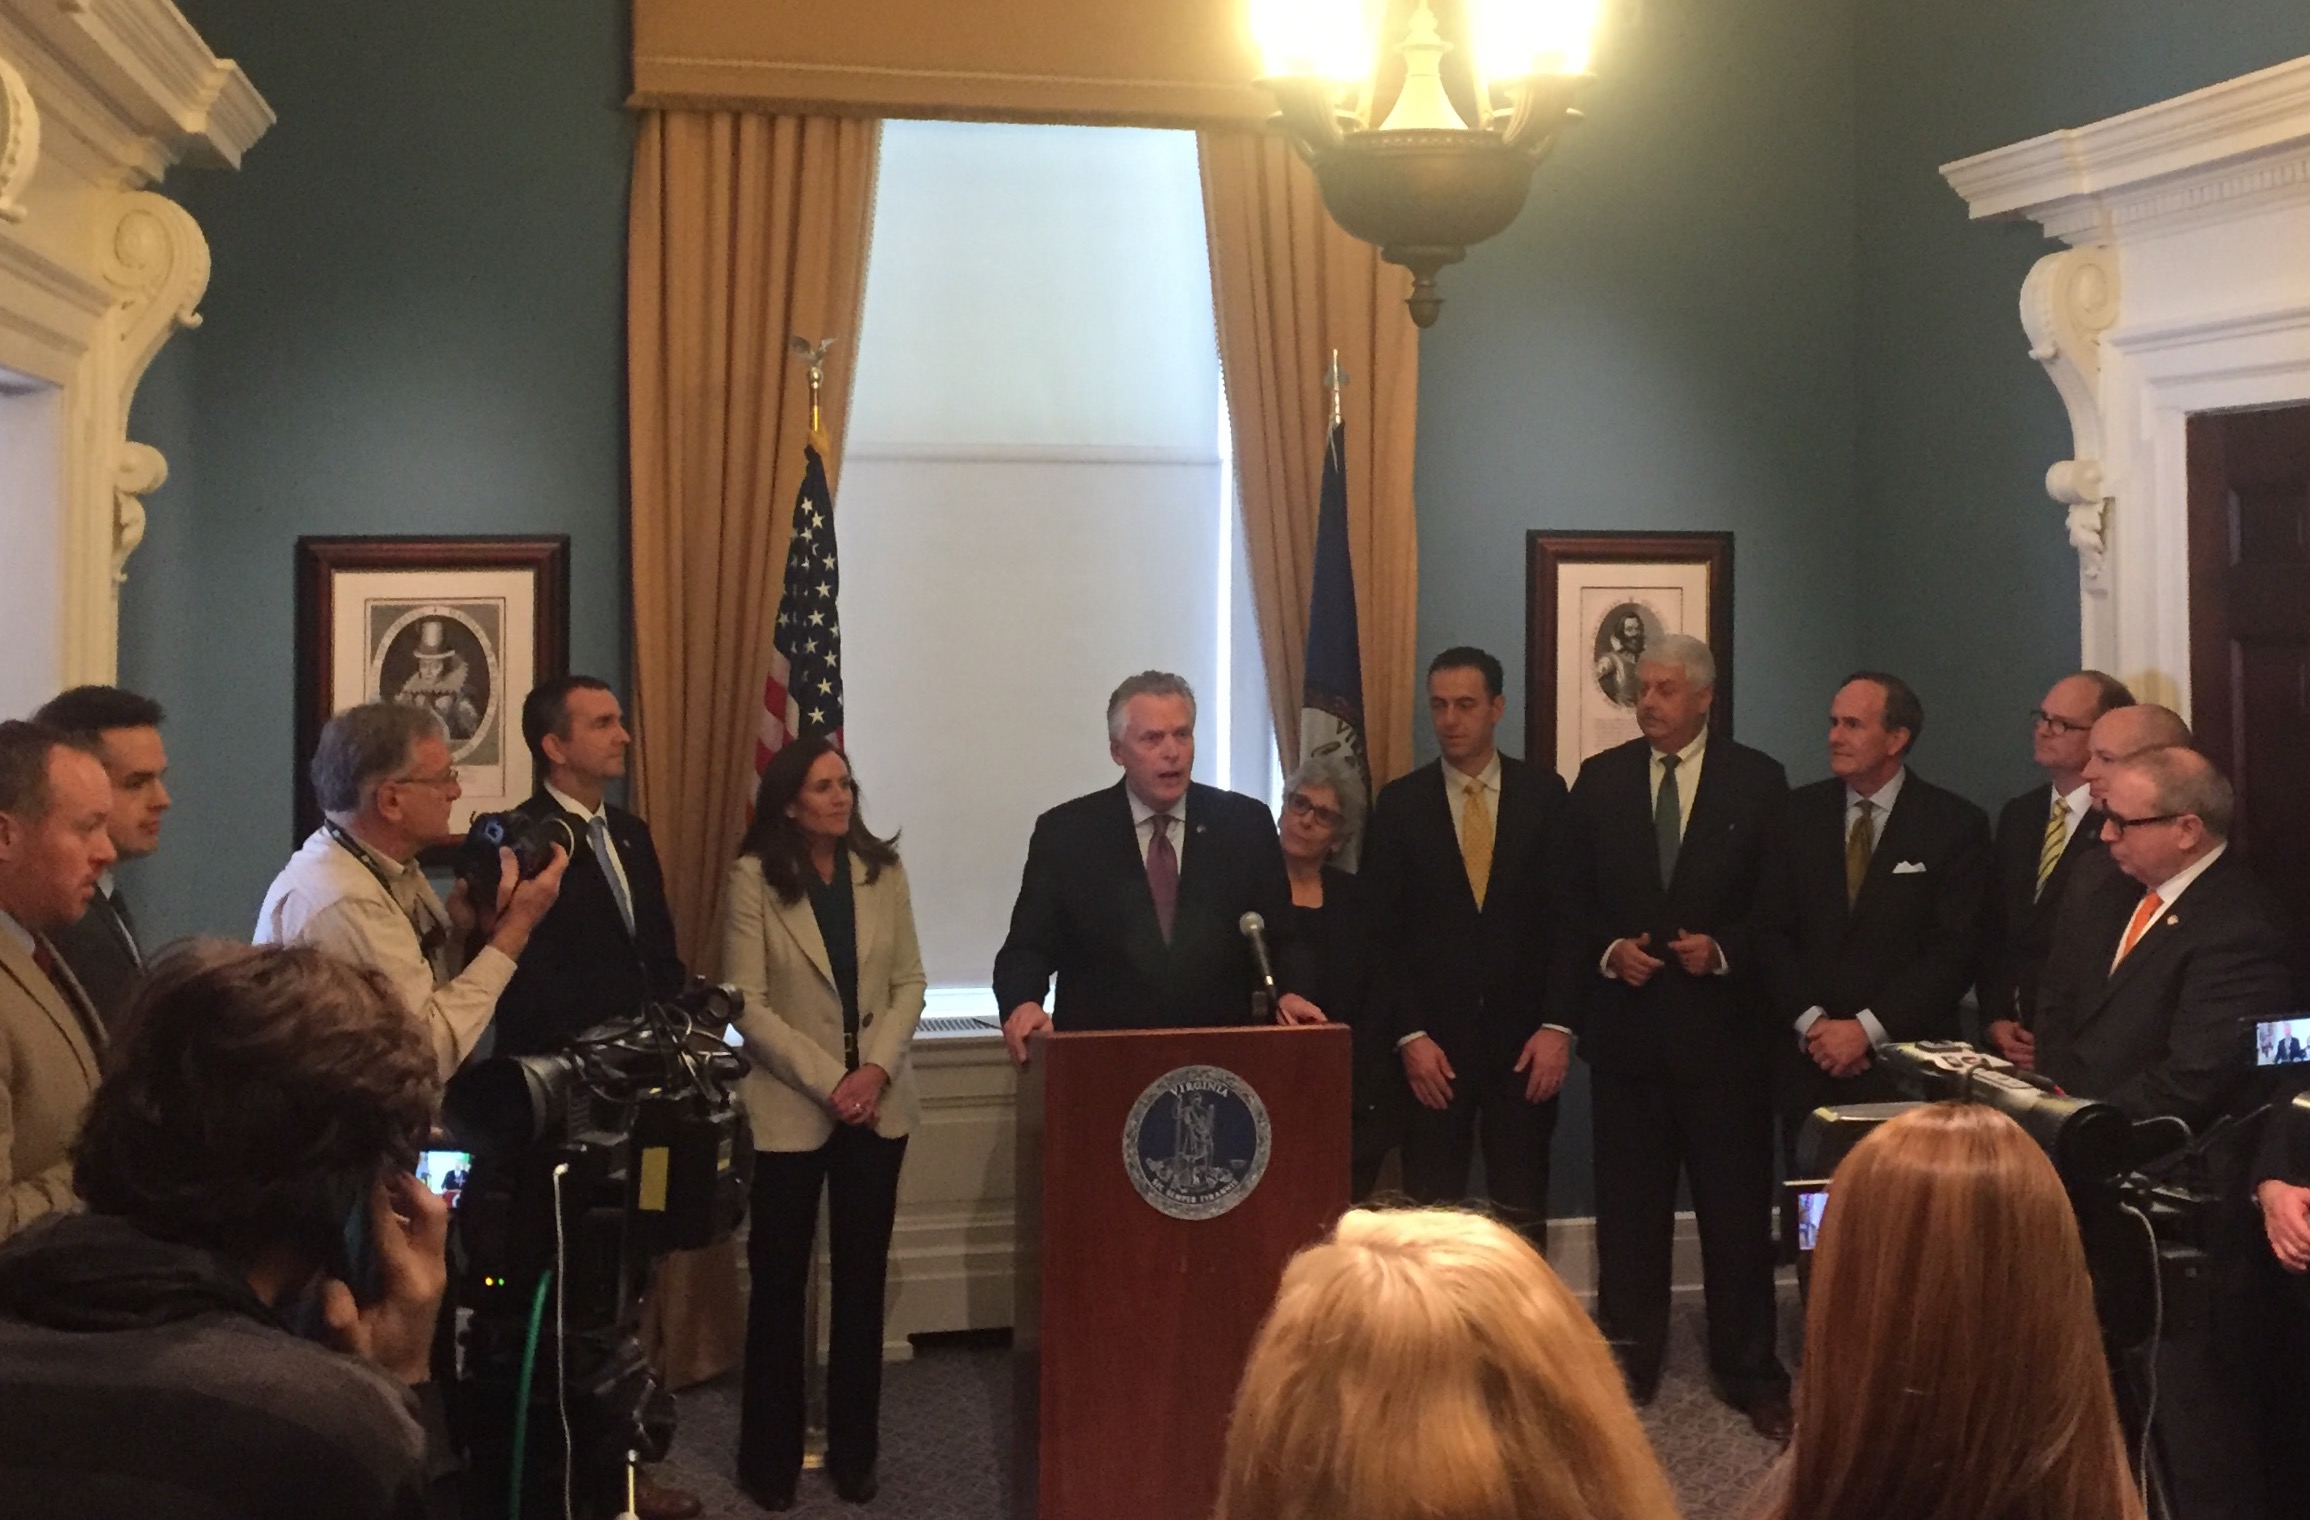 Gov. Terry McAuliffe called for legislation to make it easier to vote absentee. (Photo by Julie Rothey)